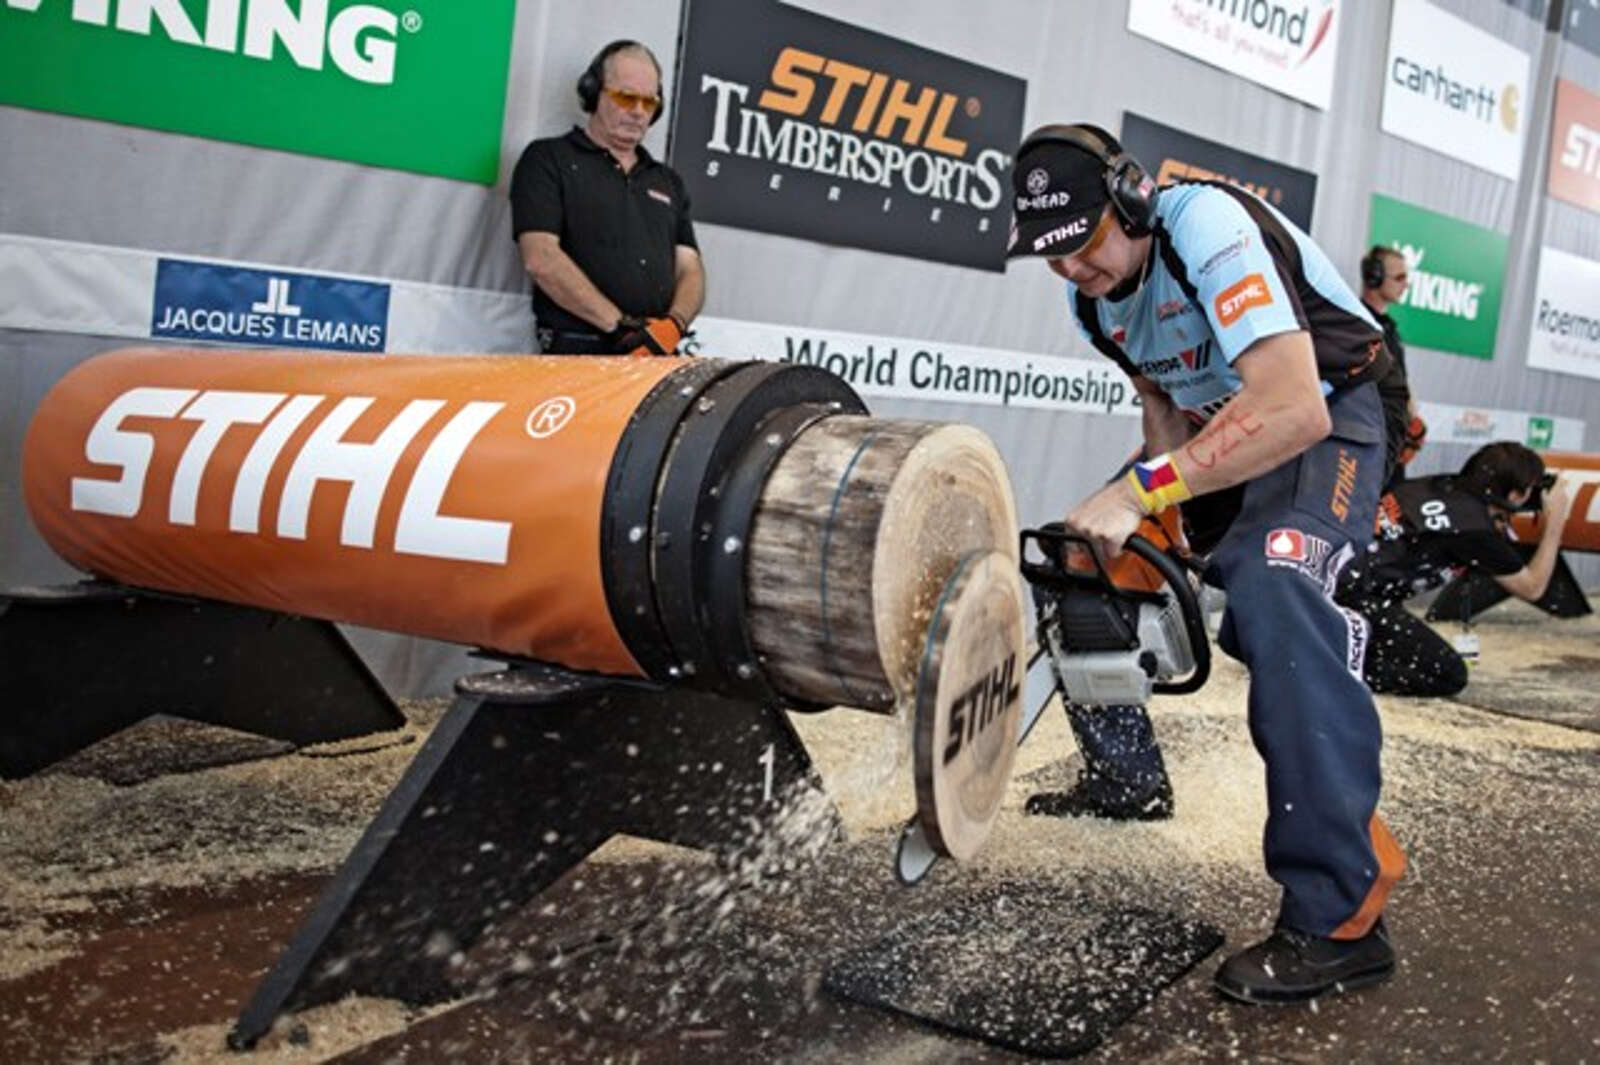 Timbersports competitor from Czech Republic